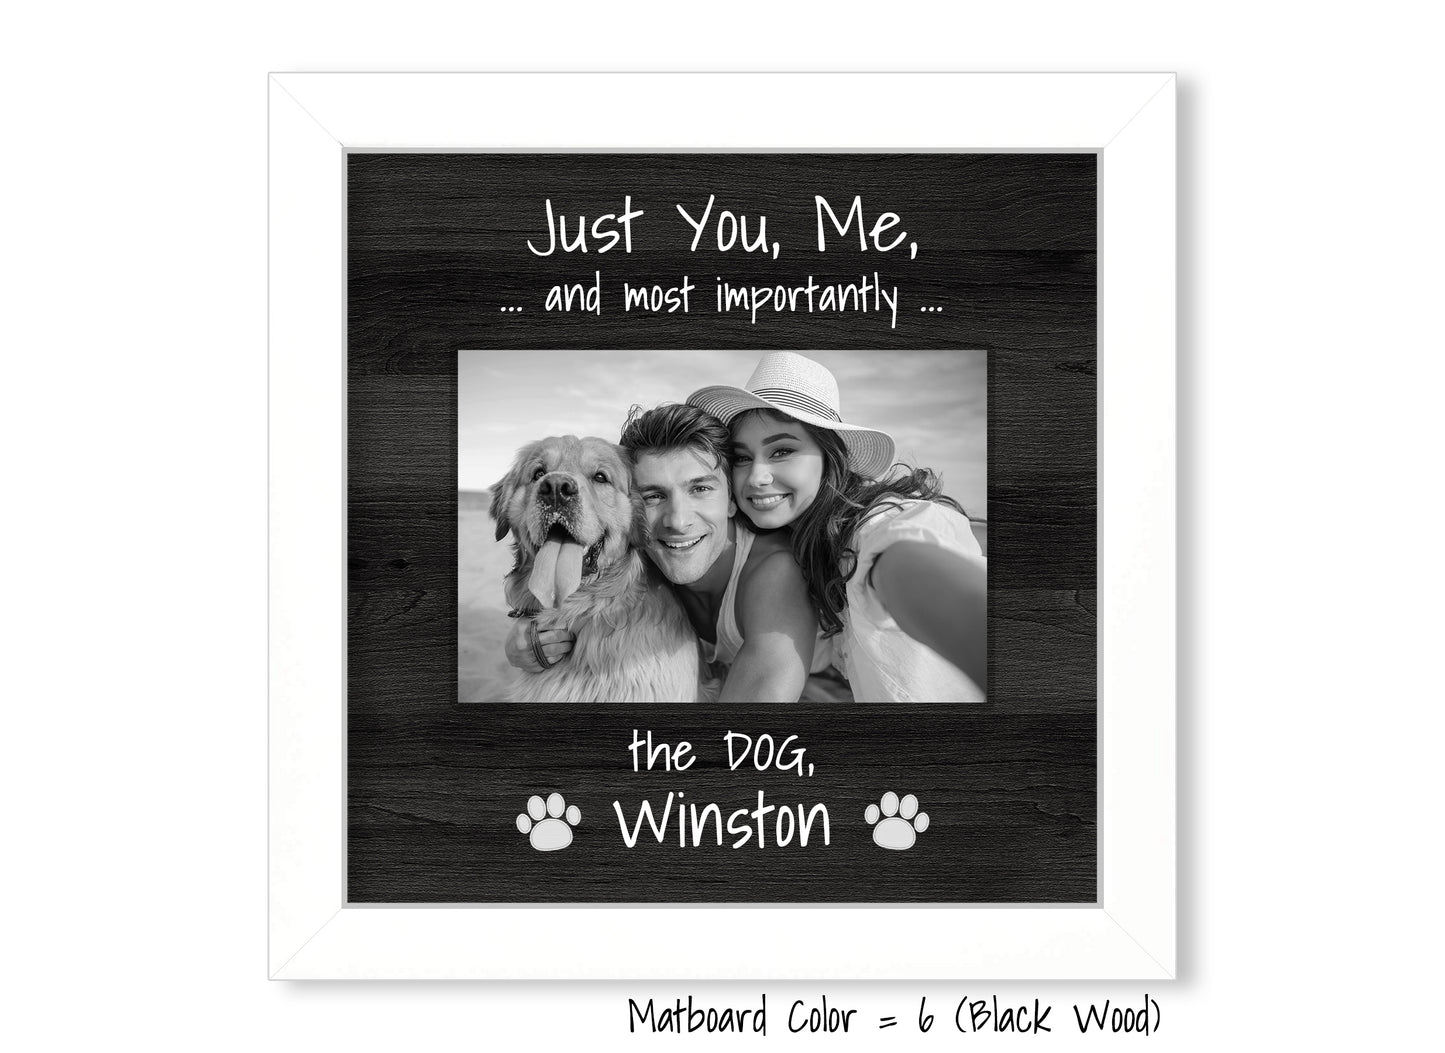 Funny Dog Frame, Just You, Me, and the Dog, 8x8 Picture Frame MatboardMemories   